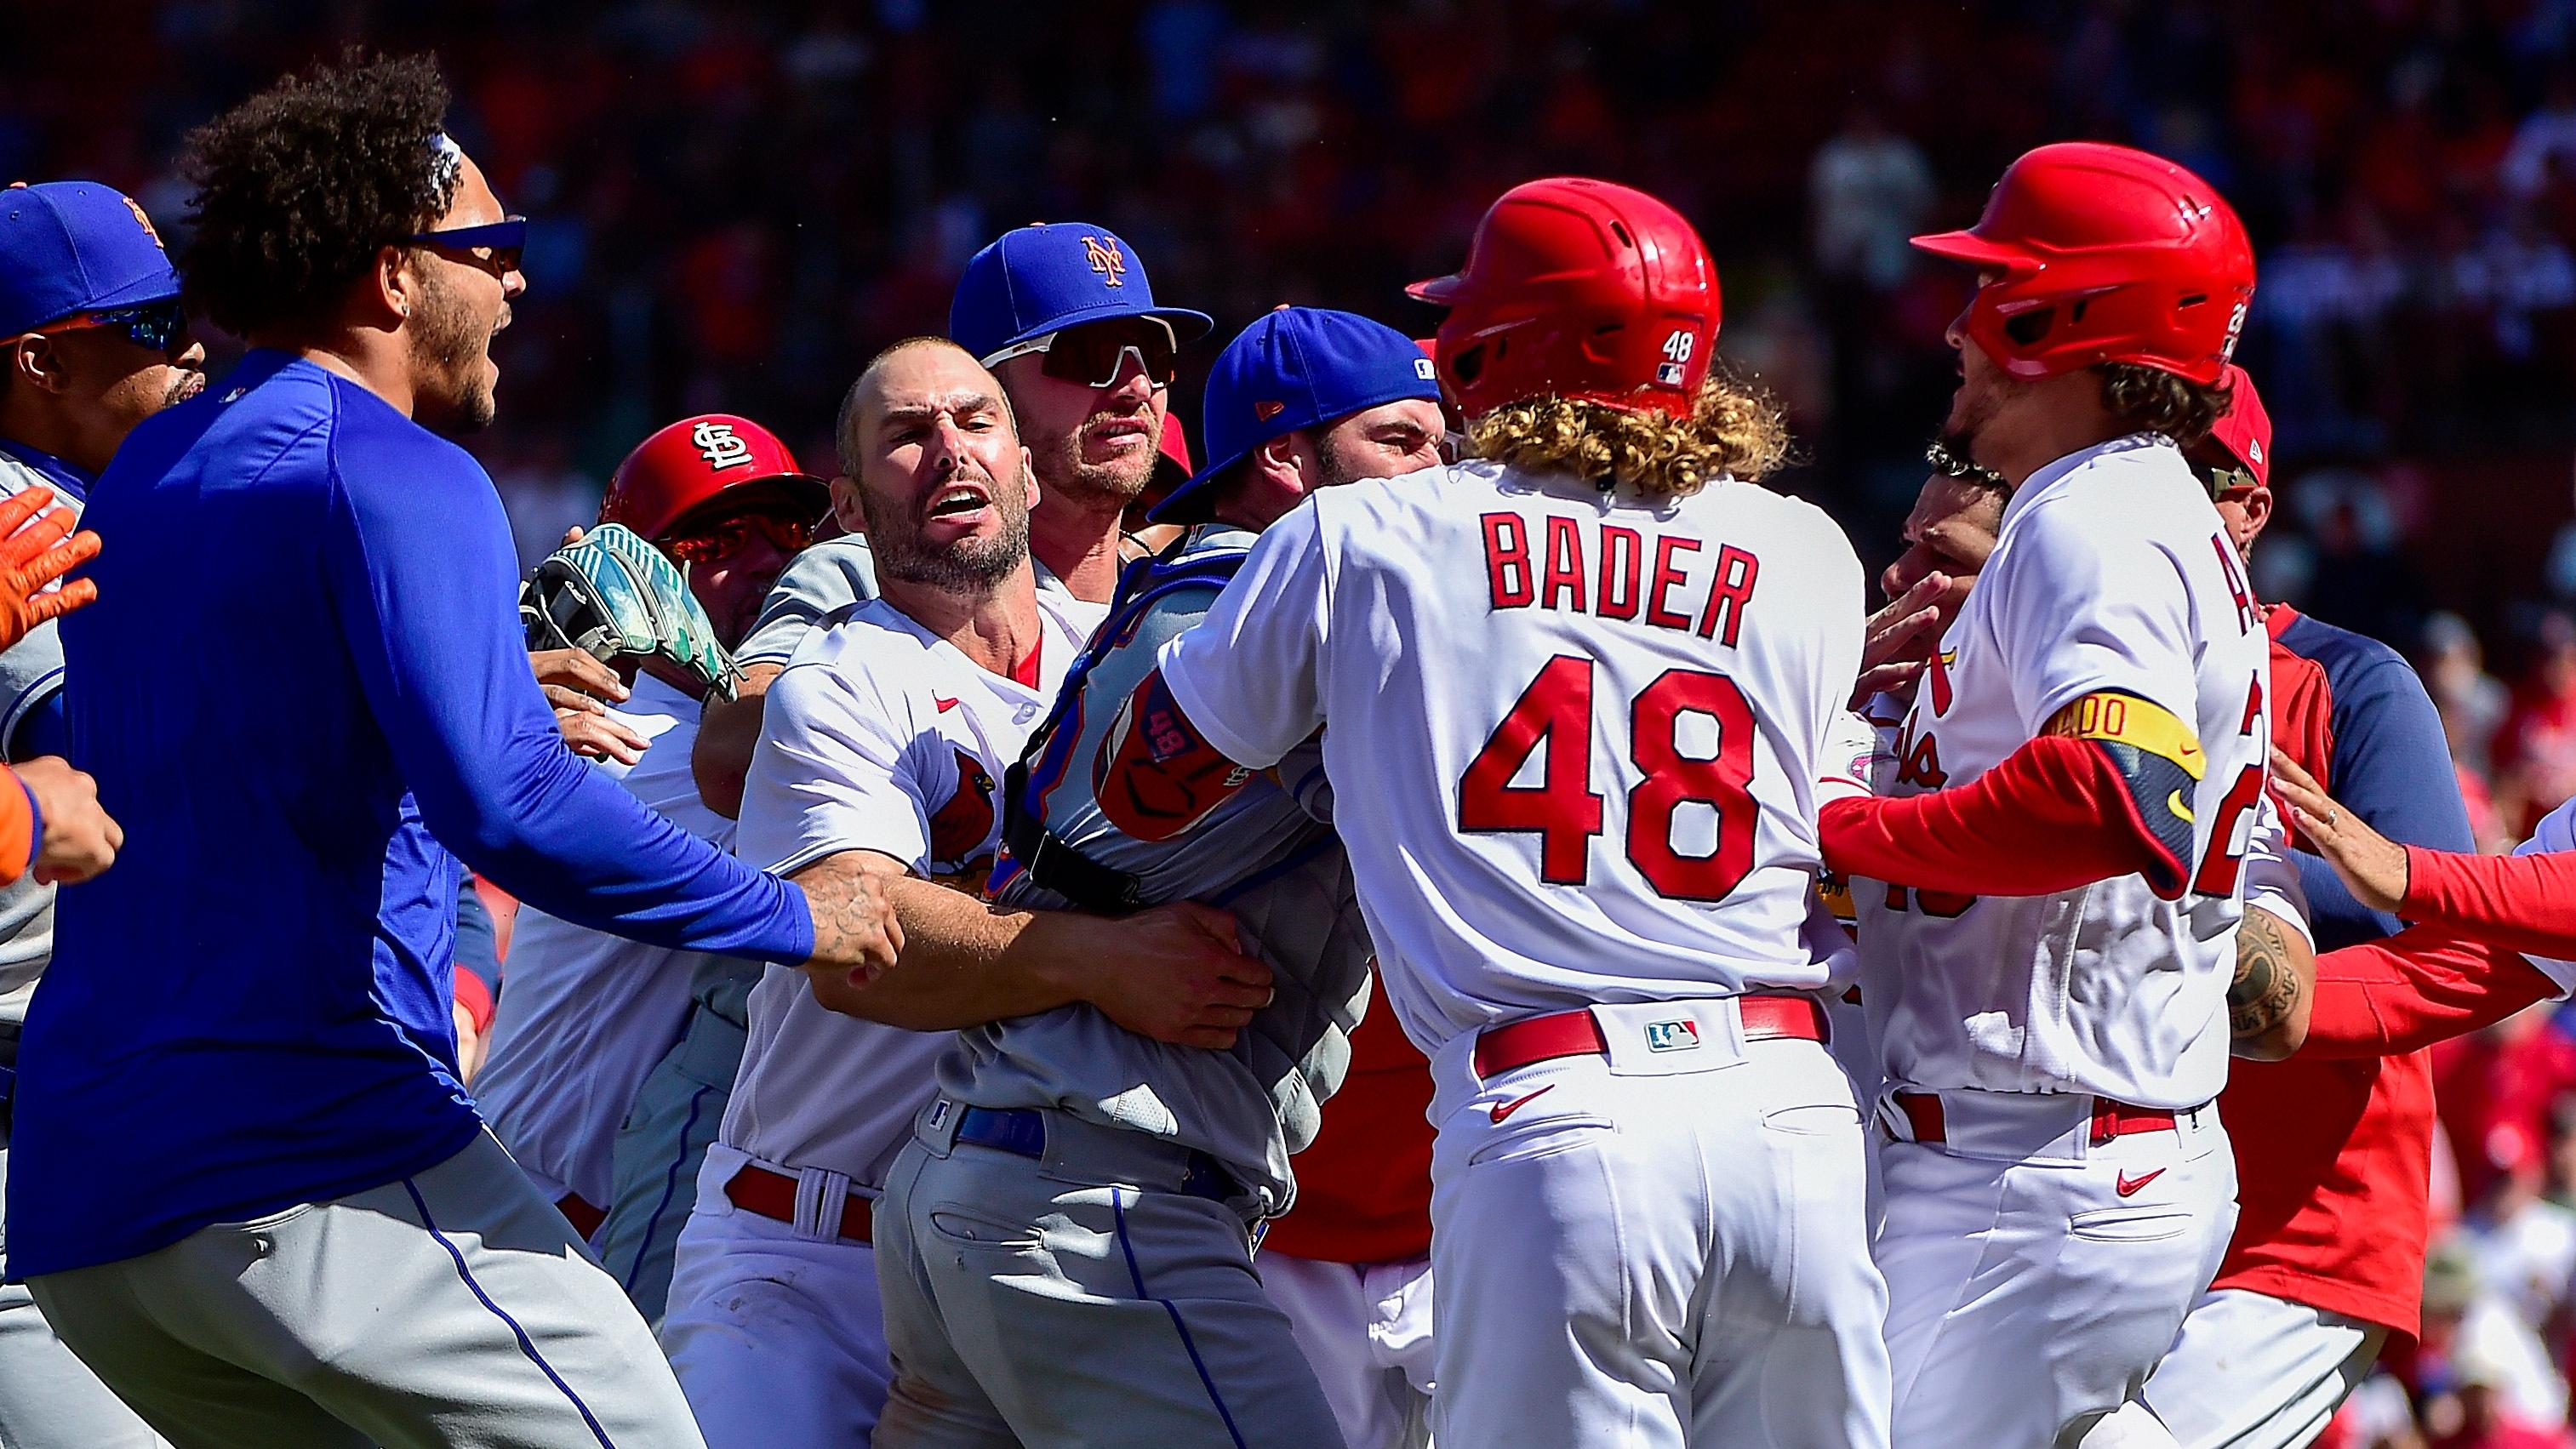 The Mets and Cardinals brawl in St. Louis / Jeff Curry-USA TODAY Sports